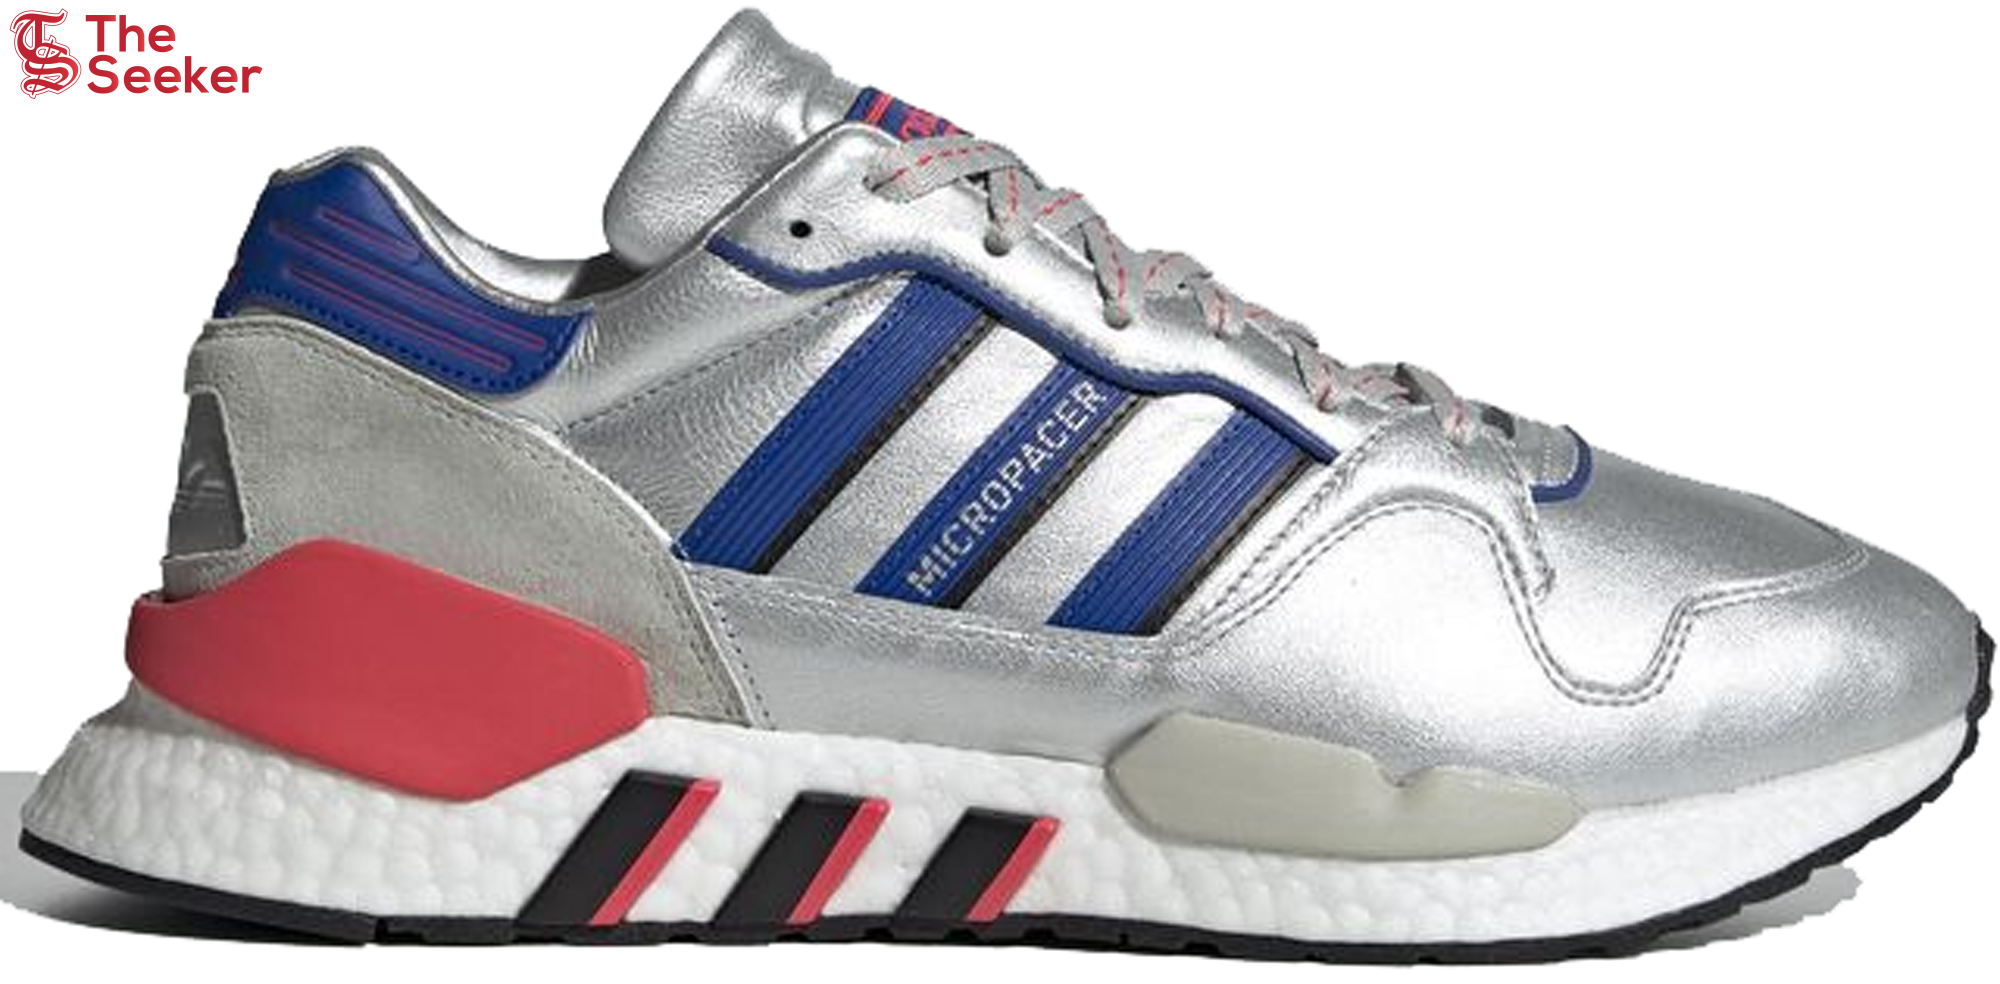 adidas ZX930 EQT Micropacer